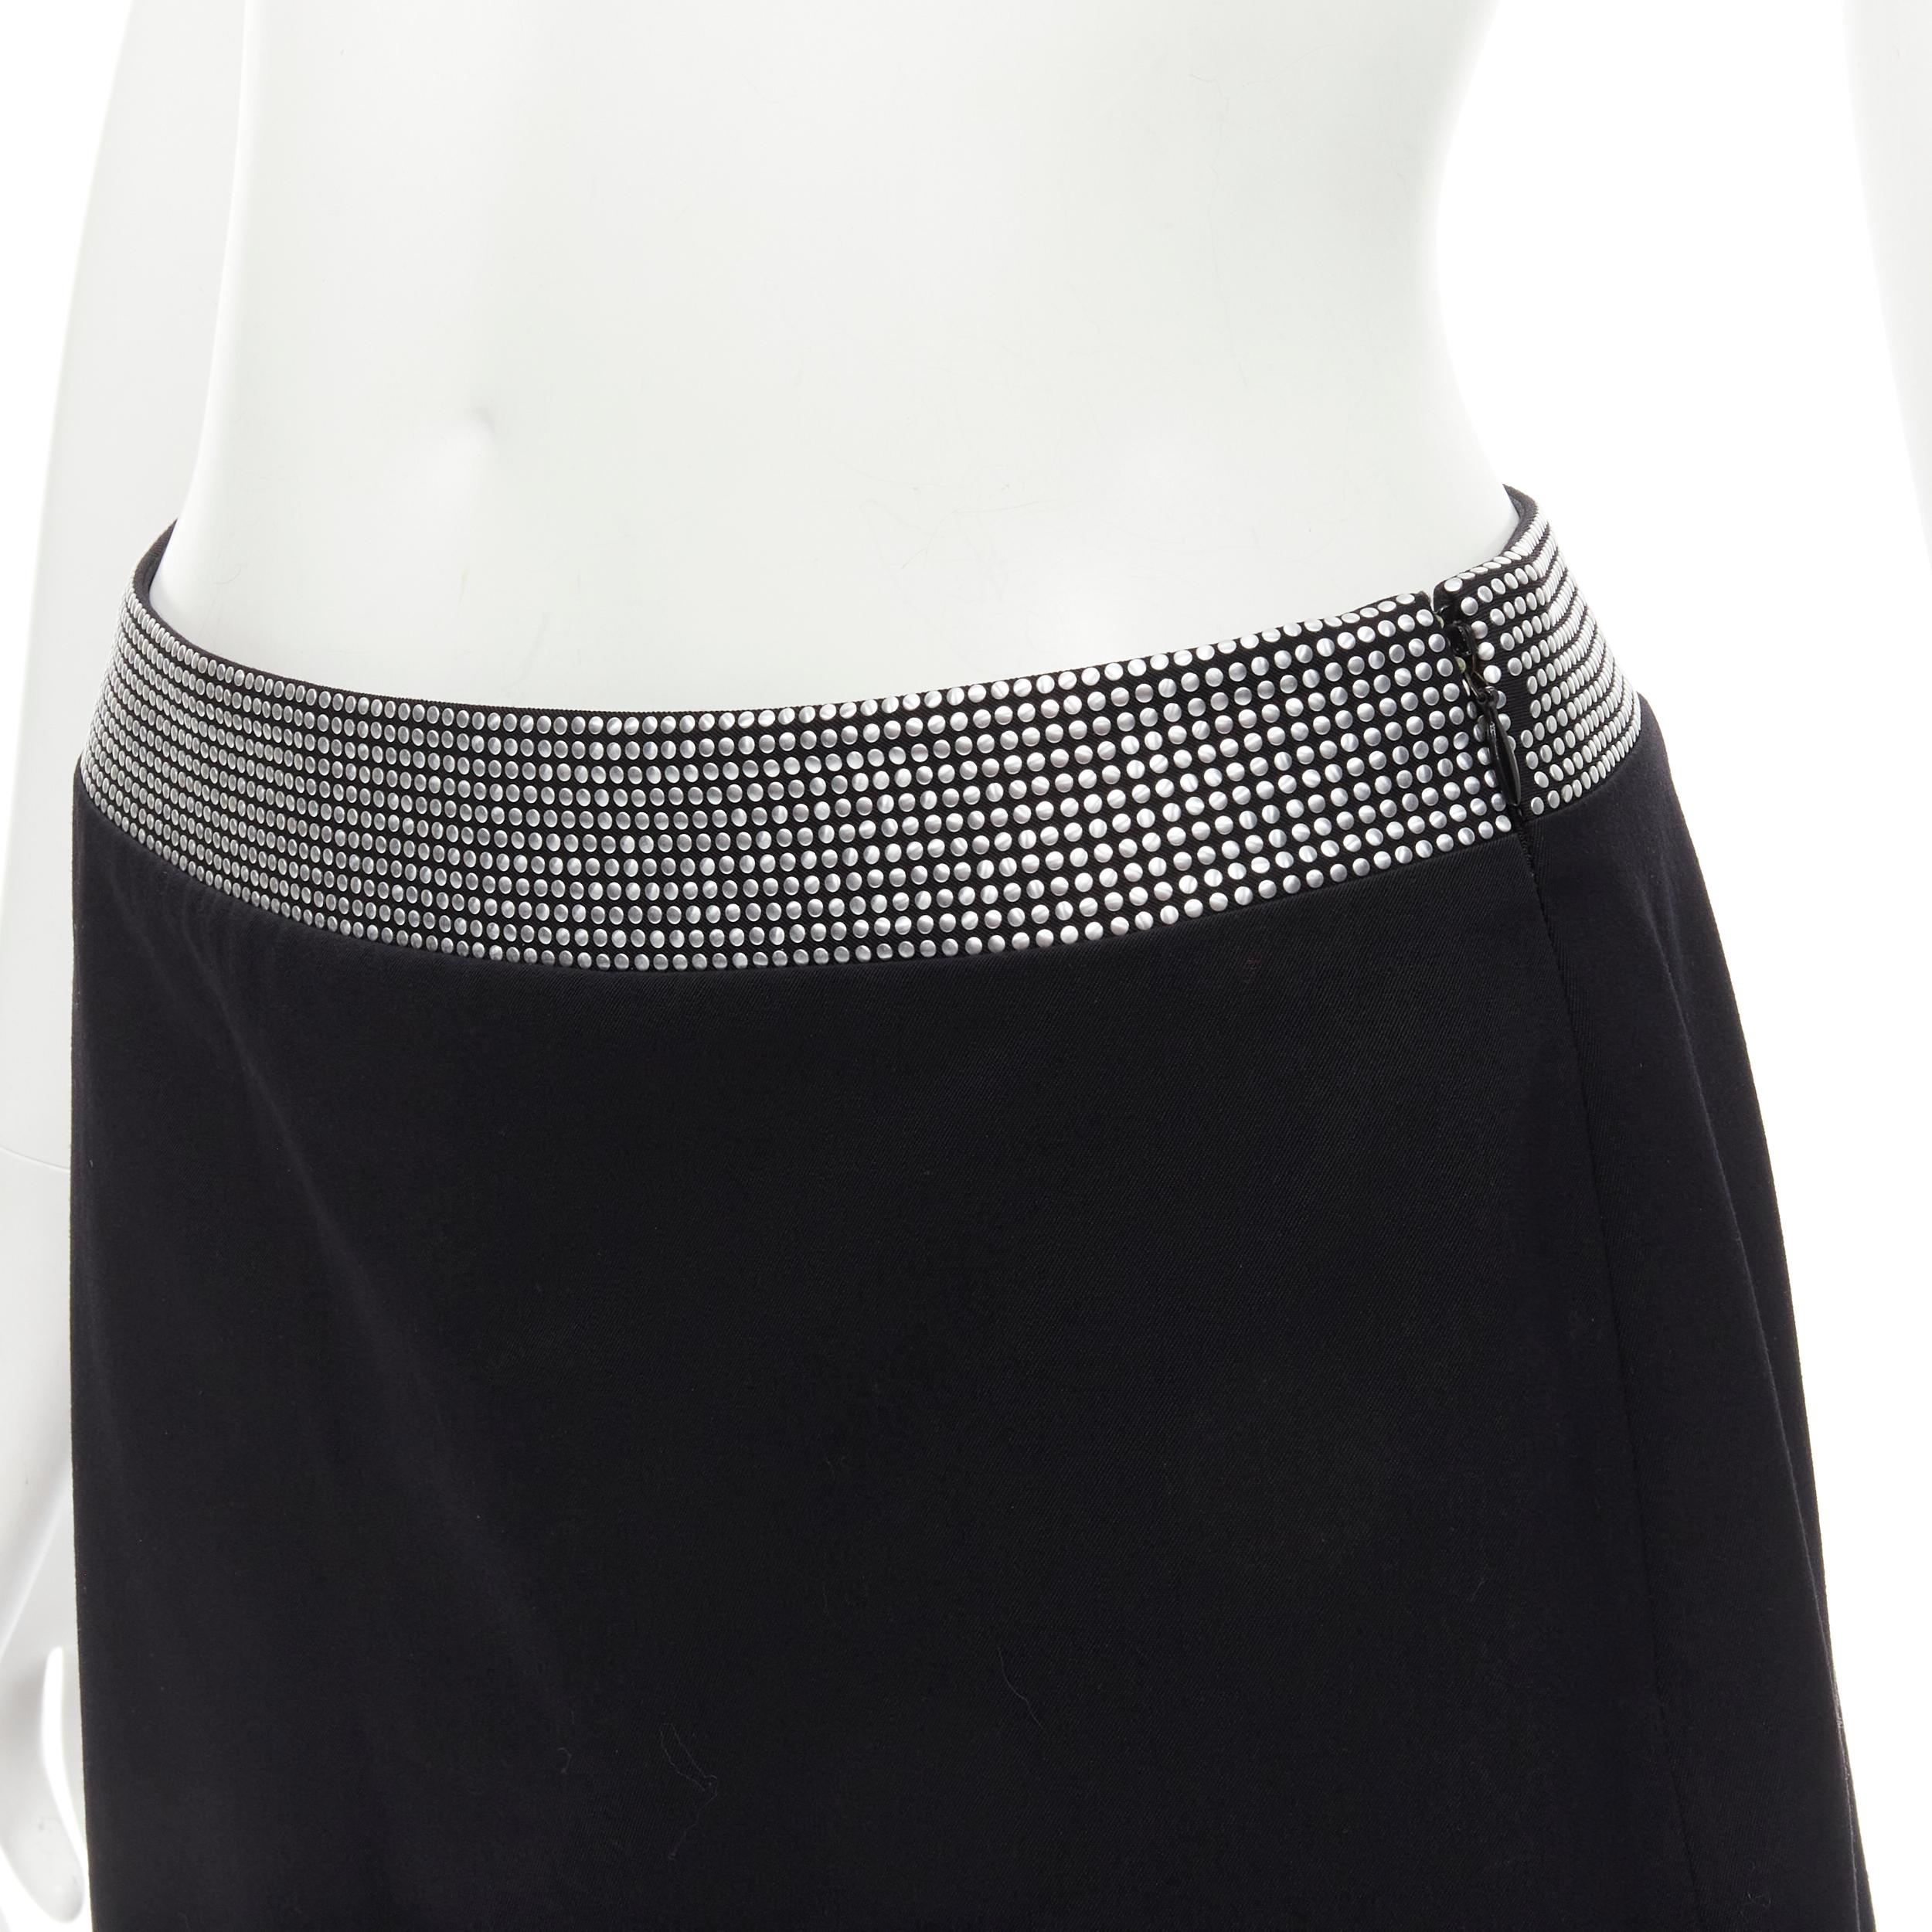 GIANNI VERSACE 1998 Vintage silver stud embellished waist wool skirt IT40 XS 
Reference: GIYG/A00138 
Brand: Gianni Versace 
Collection: 1998 
Material: Wool 
Color: Black 
Pattern: Solid 
Closure: Zip 
Extra Detail: Silver studded waist. 
Made in: